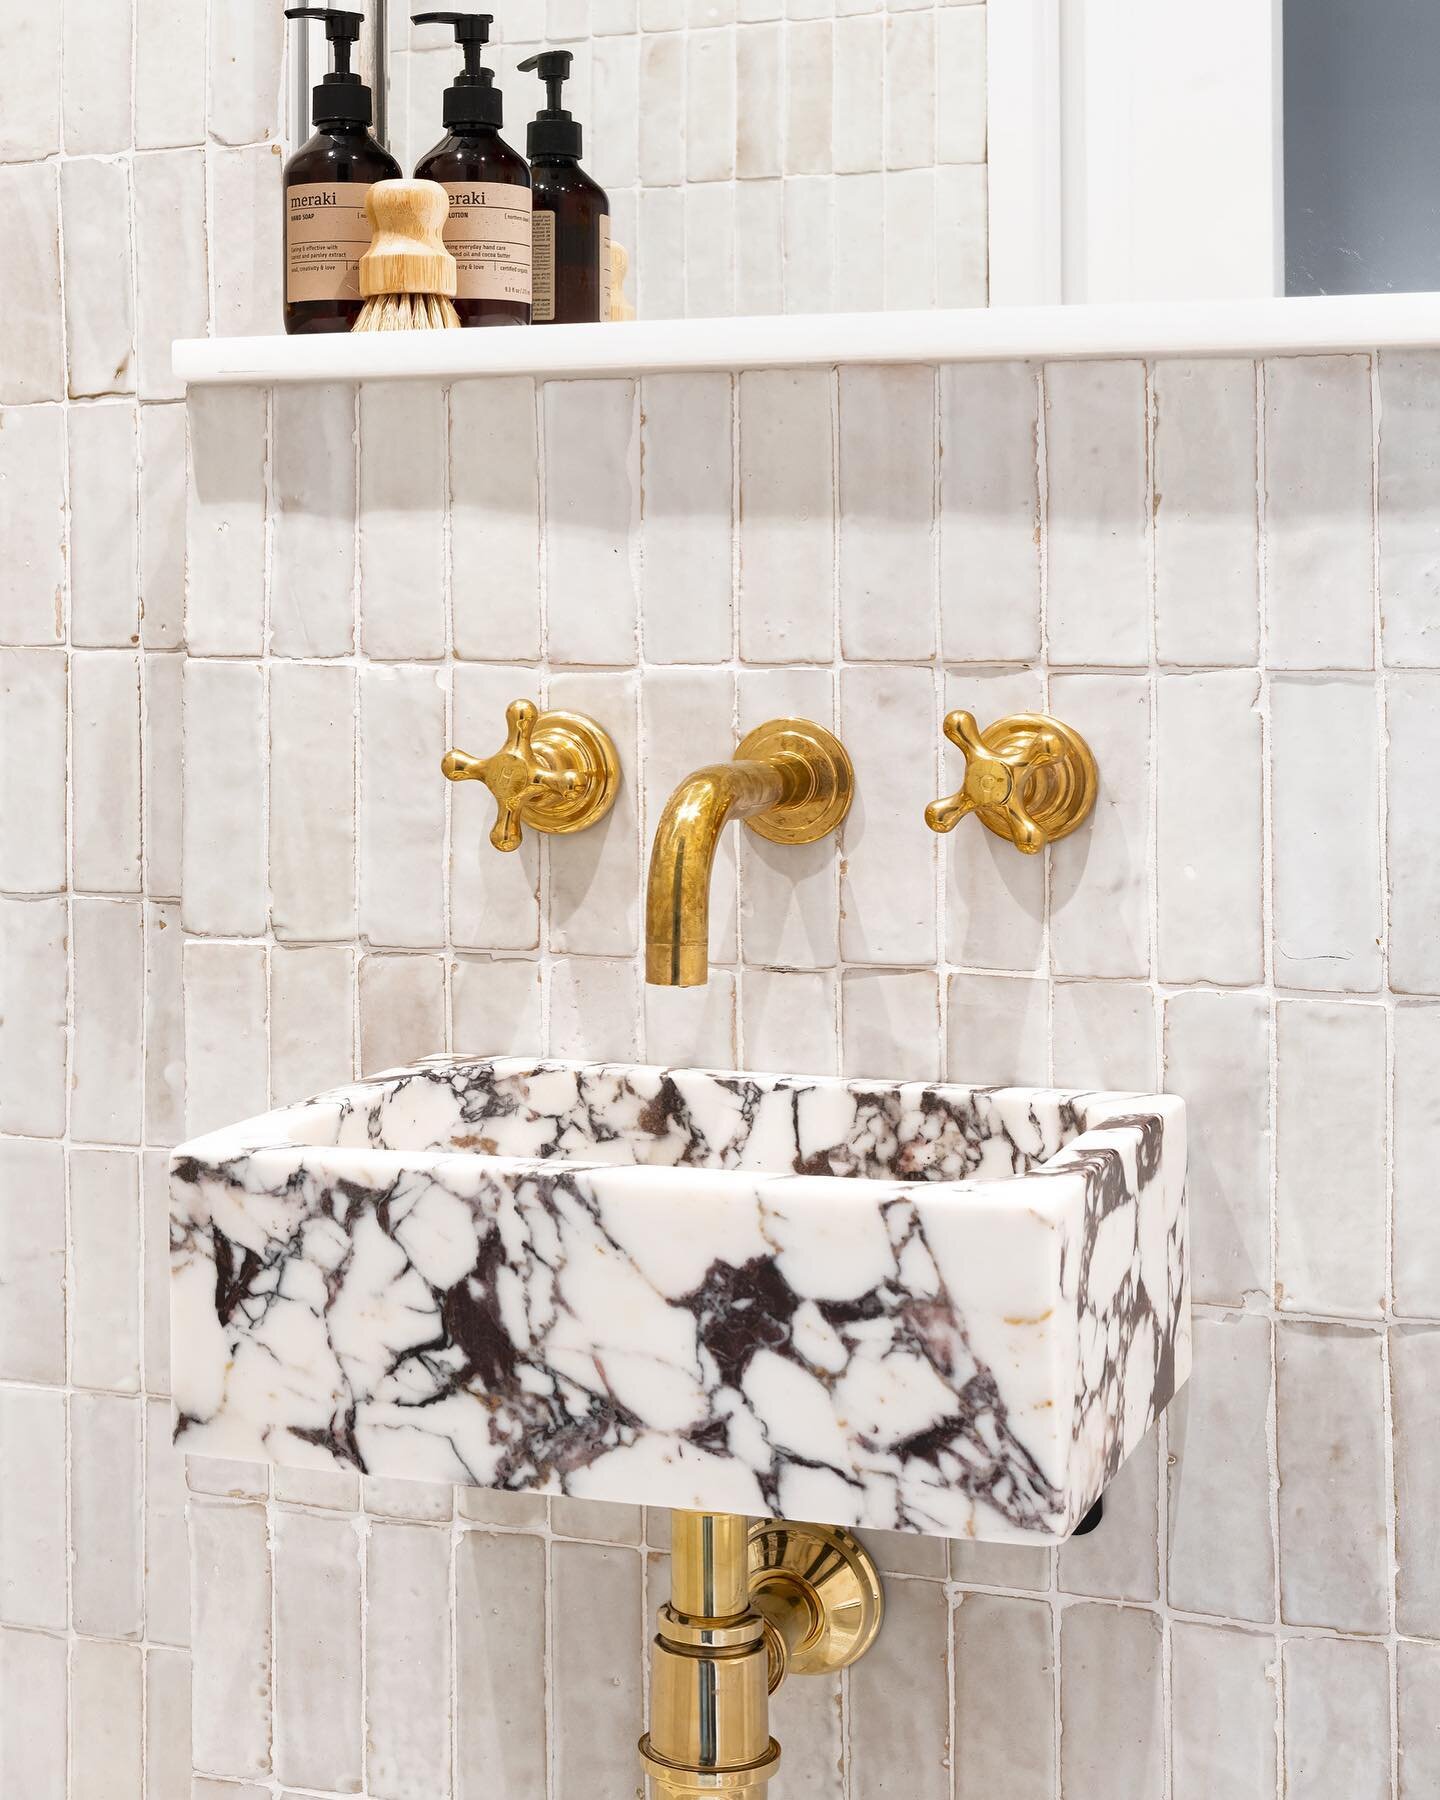 Bathroom details ✨this space is tiny so it was important to keep the finishes simple while still adding a touch of luxury. I love using materials that will age and patina over time. We used a custom made hand carved Calacatta Viola marble basin, raw 